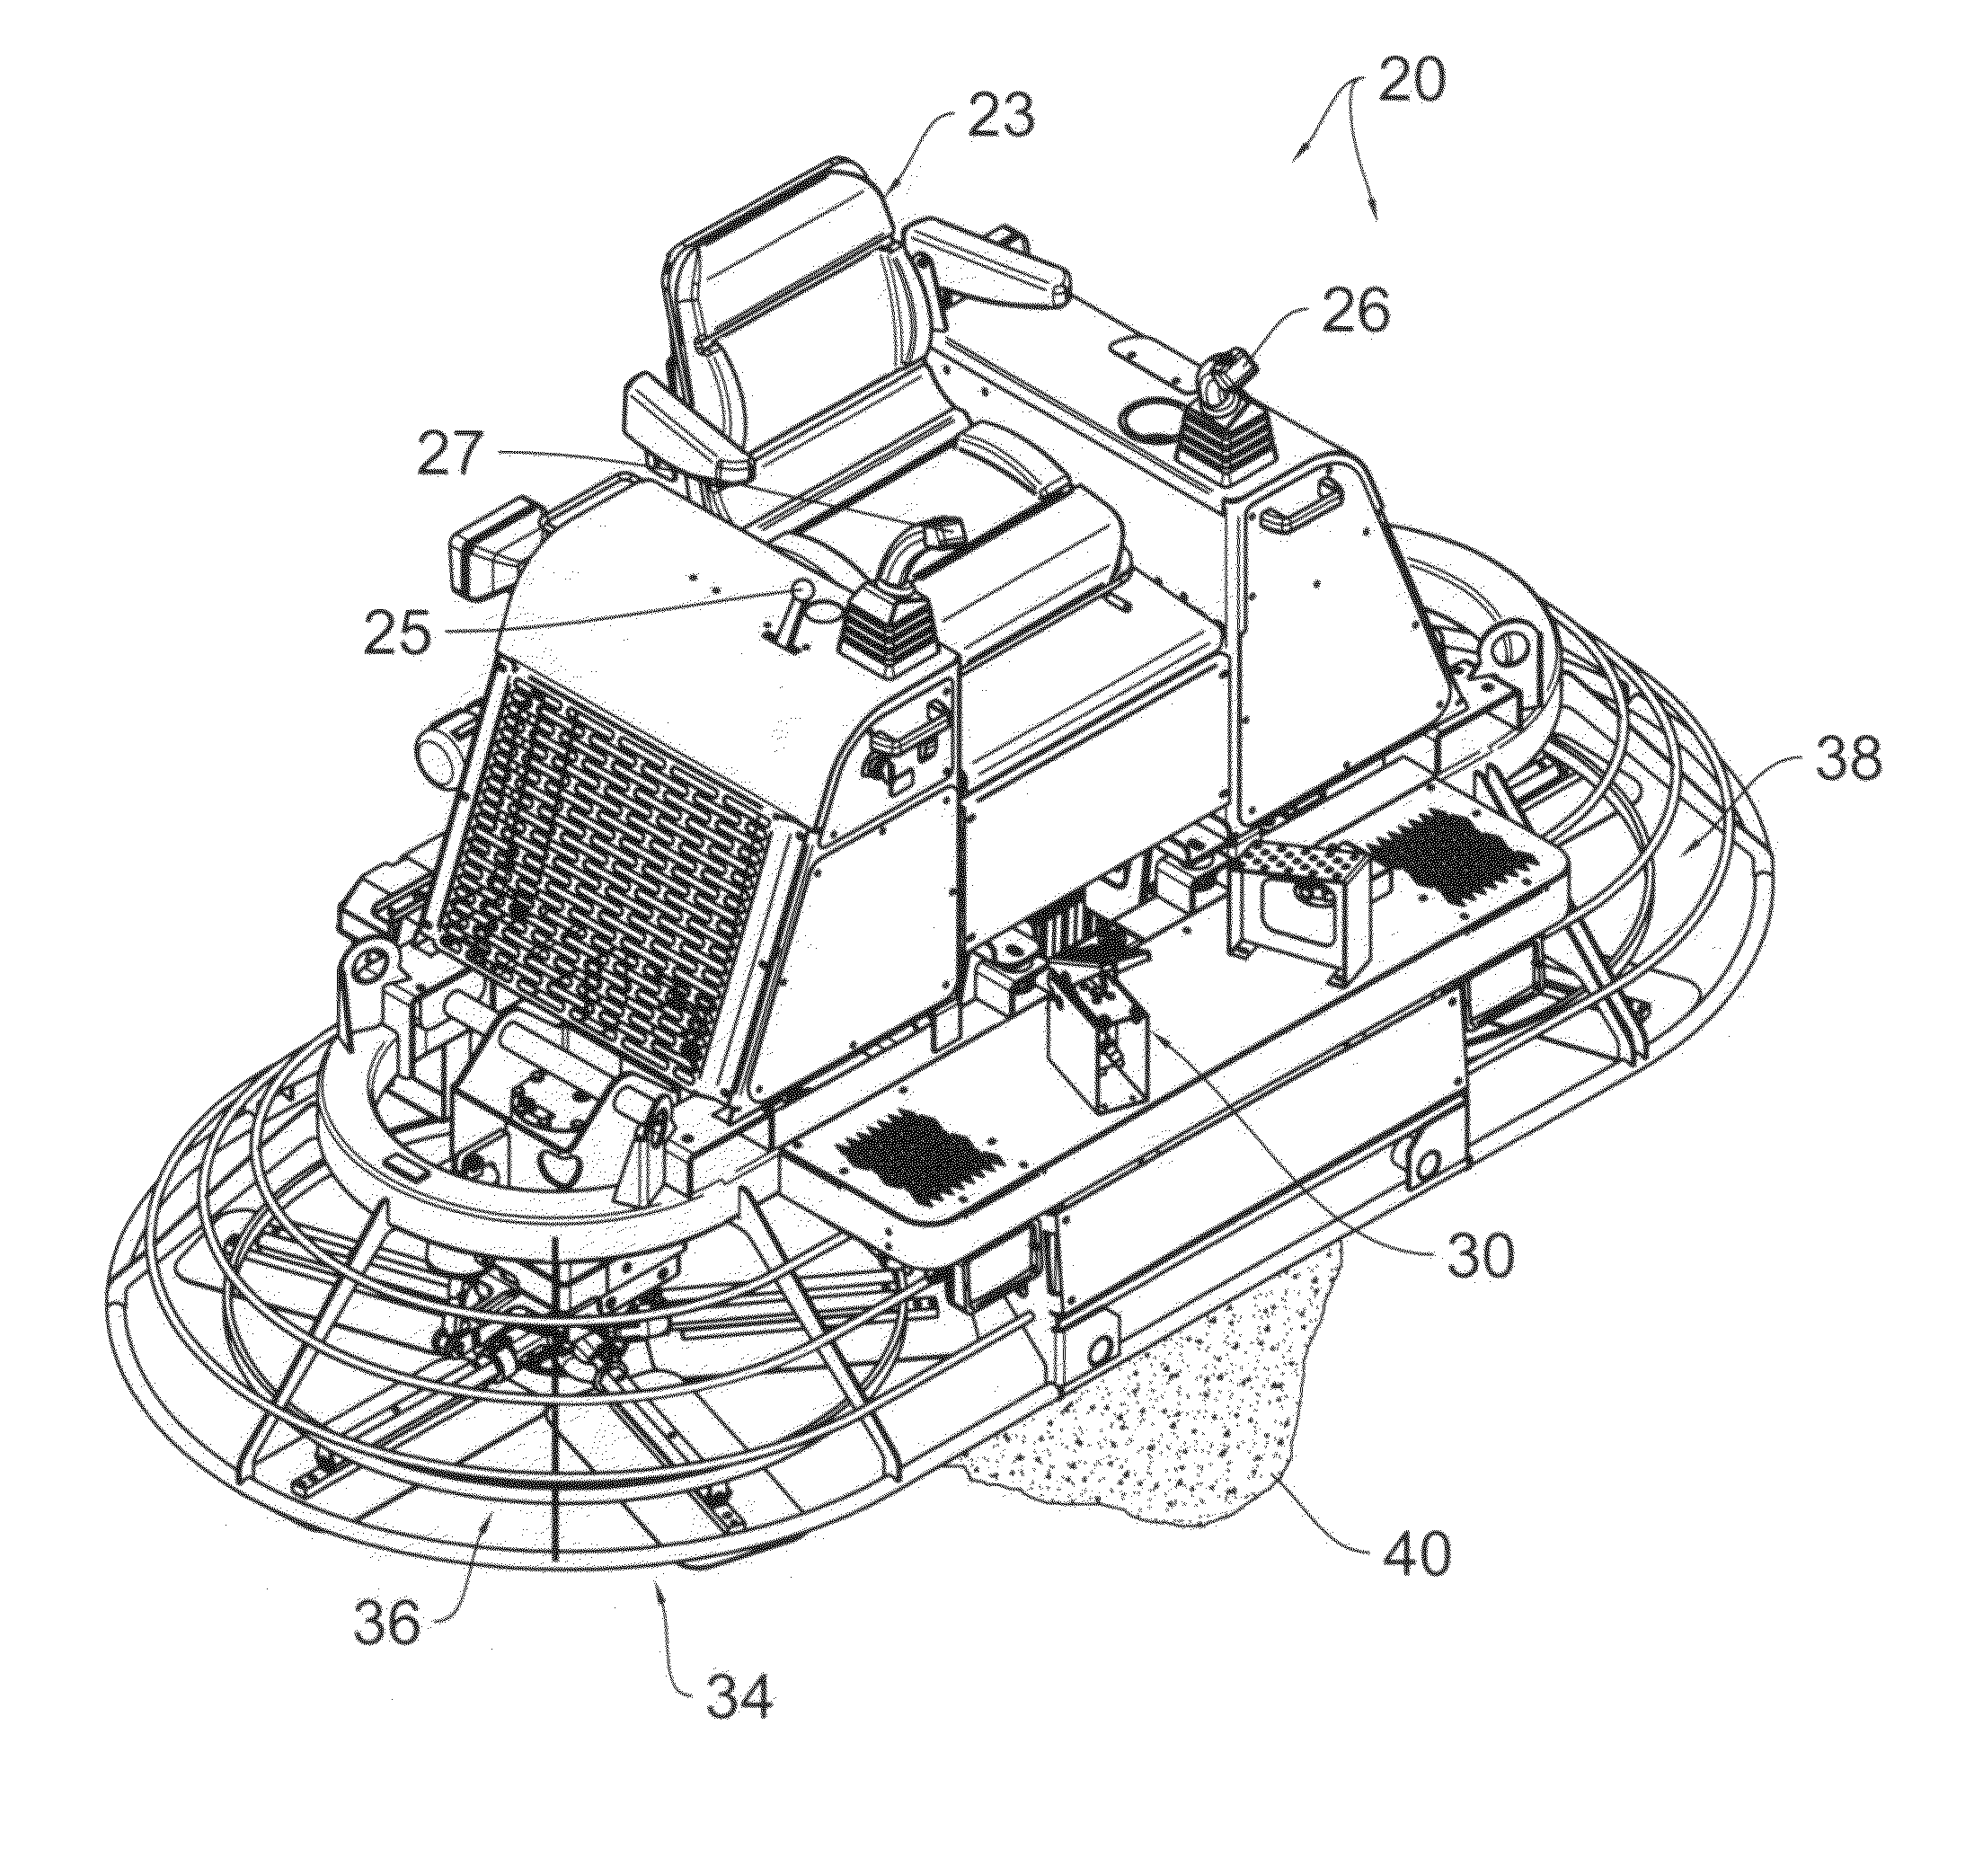 Hydraulic riding trowels with automatic load sensing